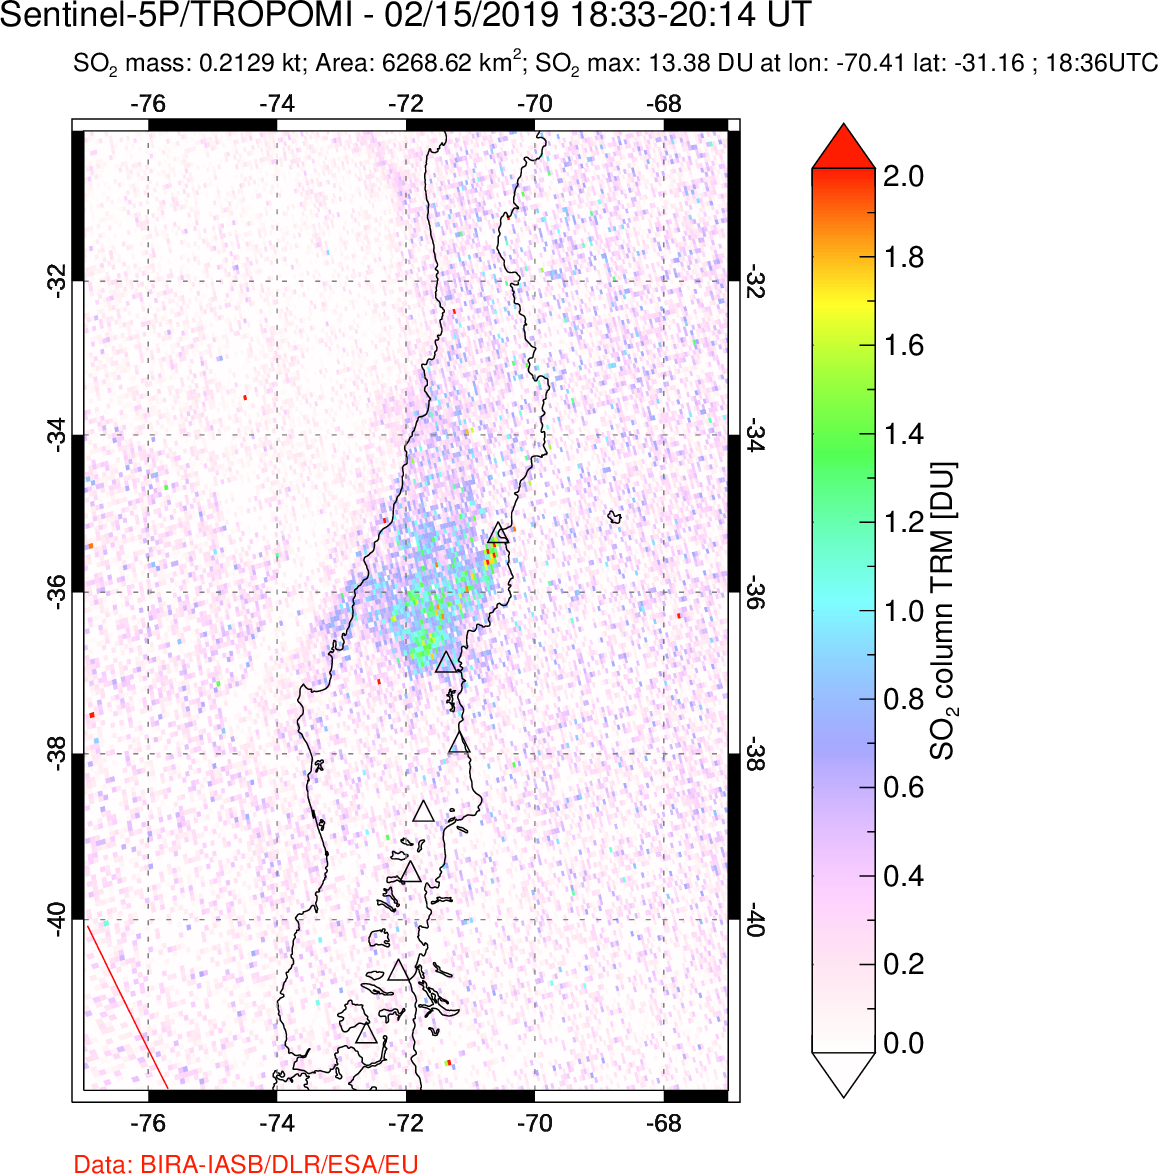 A sulfur dioxide image over Central Chile on Feb 15, 2019.